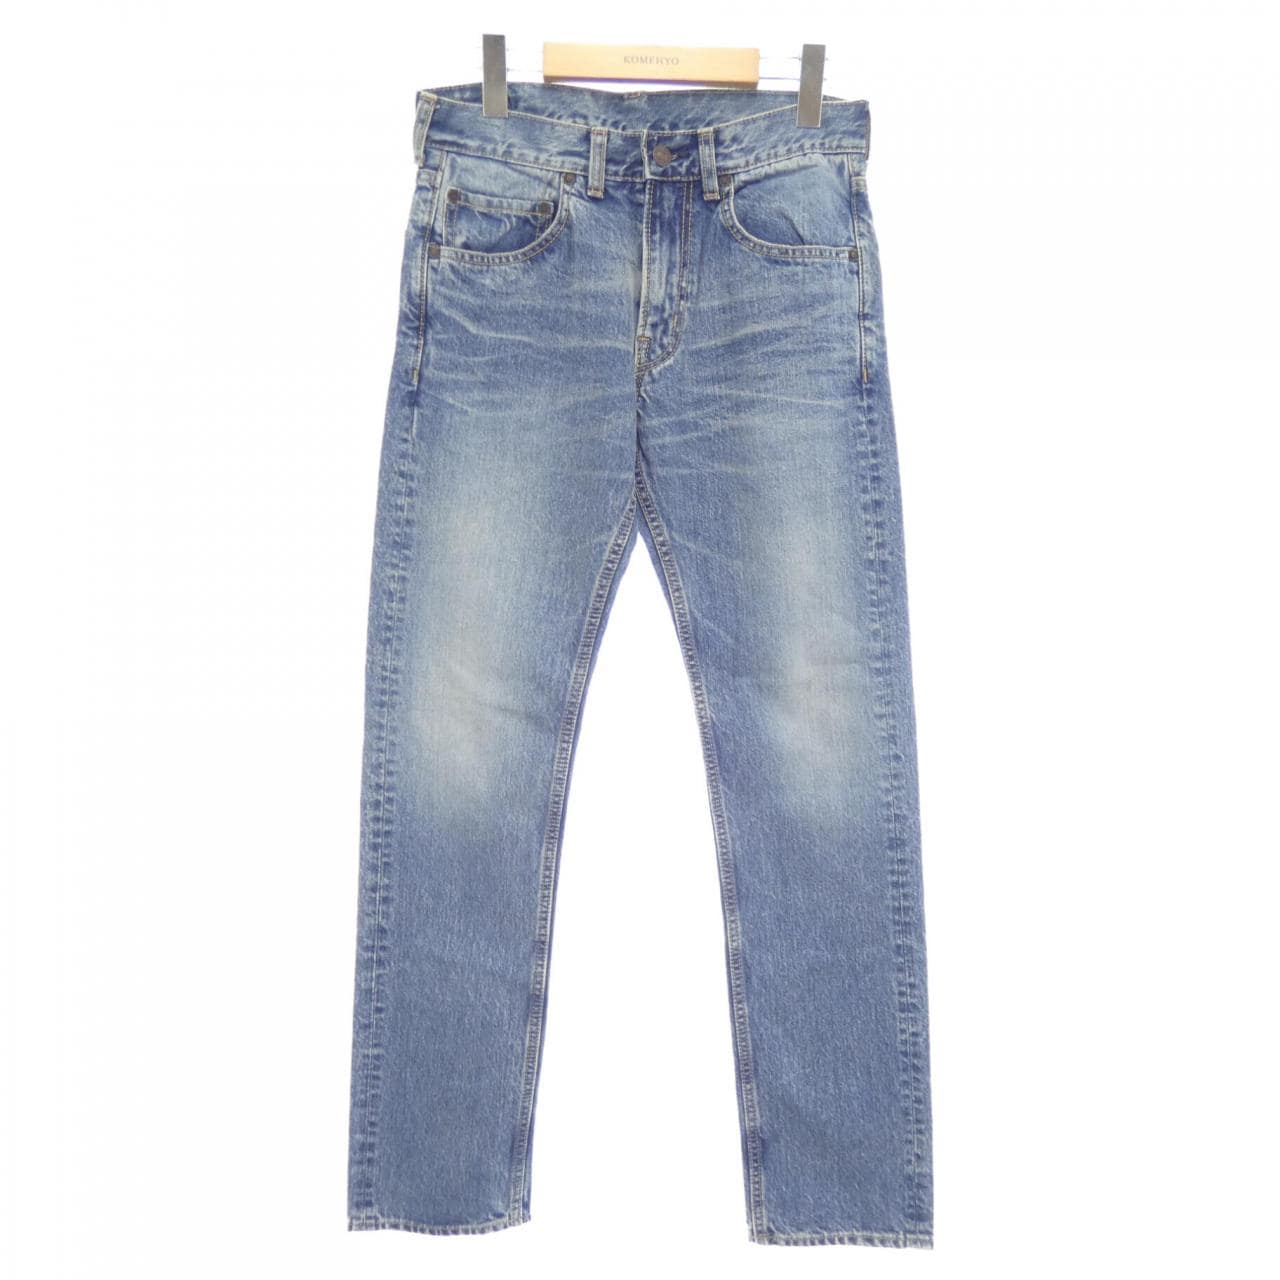 THE KOMEHYO|HOLLYWOOD RANCH MARKET H.R.MARKET Jeans|Hollywood